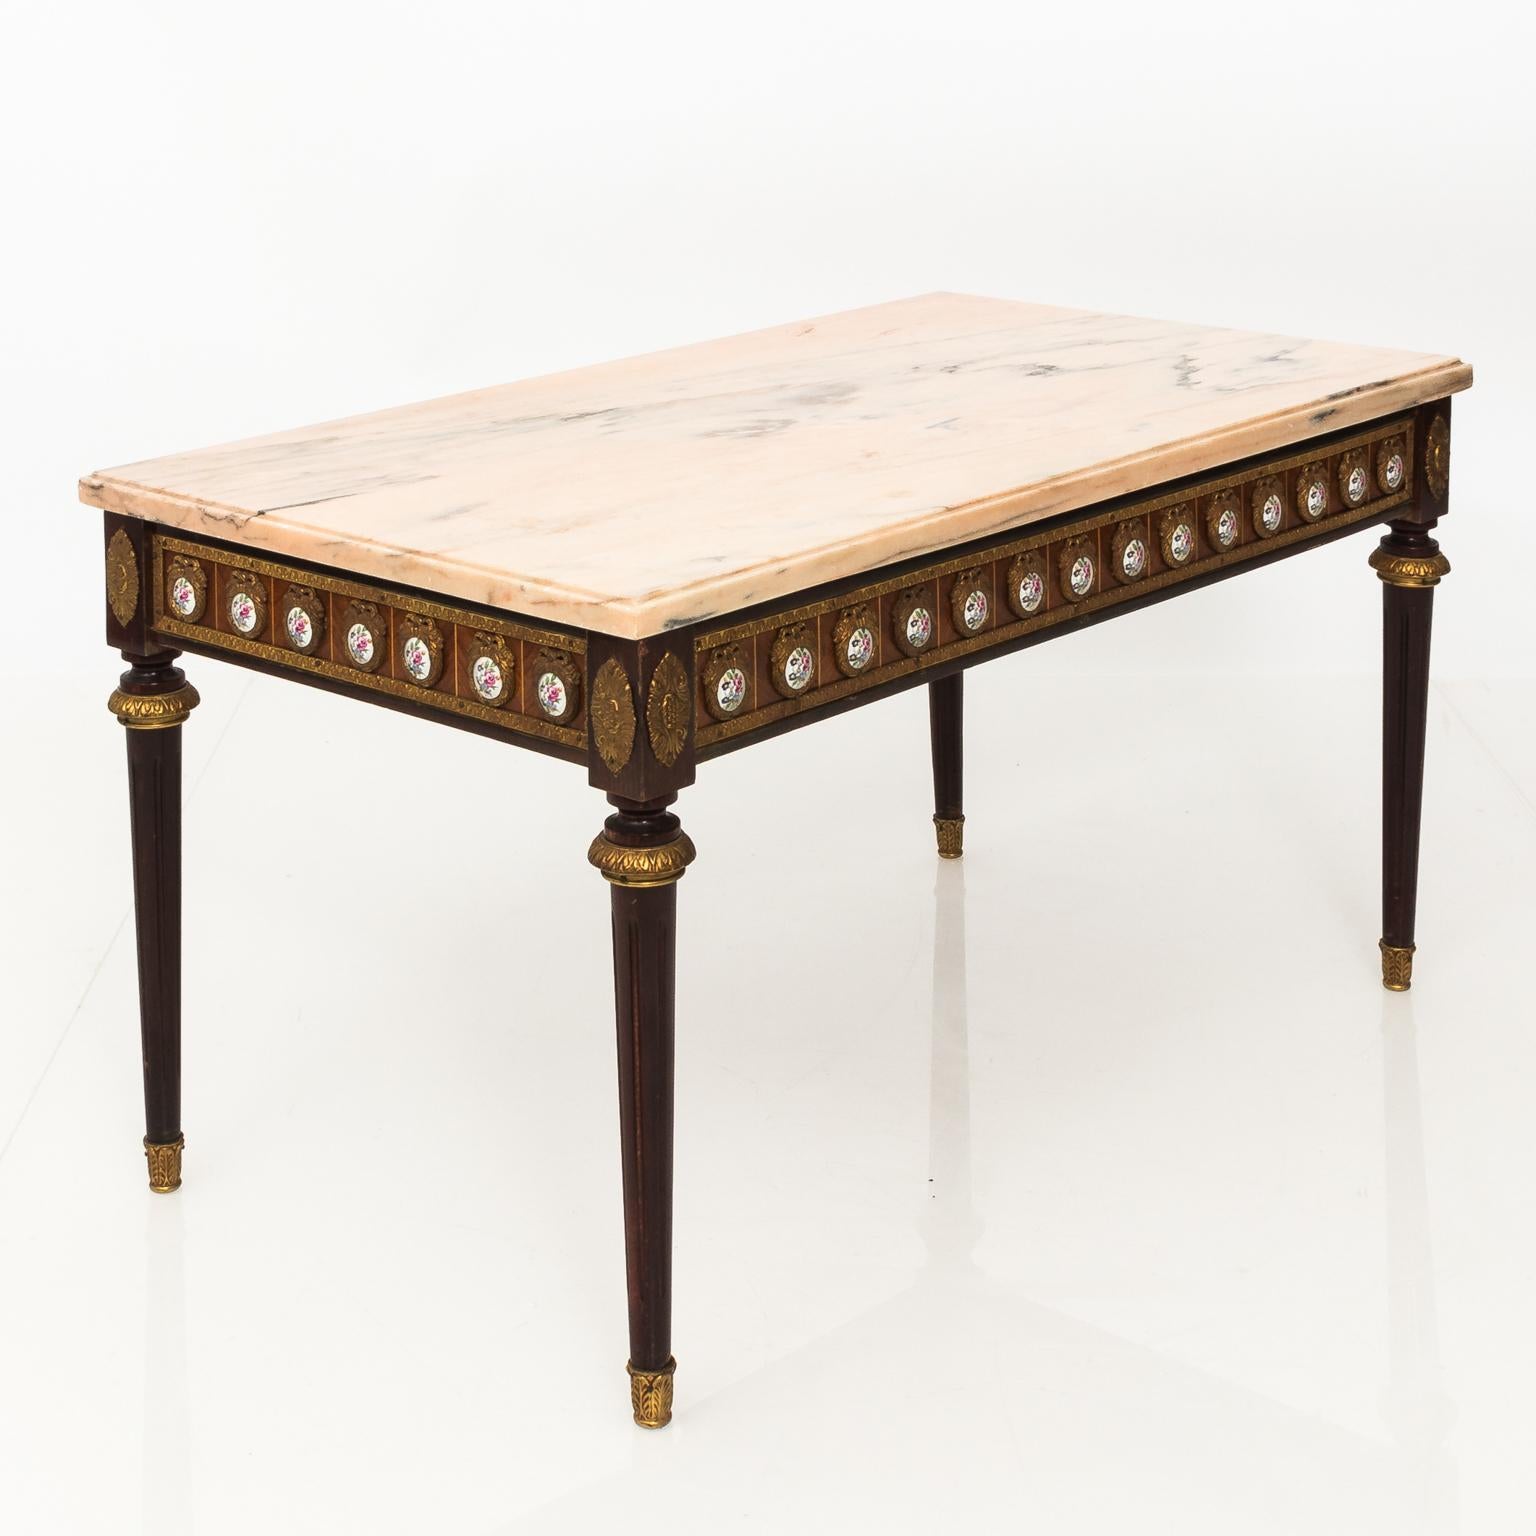 Louis Philippe style marble-top console table with bronze mounts and porcelain painted flower inserts, circa early 20th century. Signed on the base.